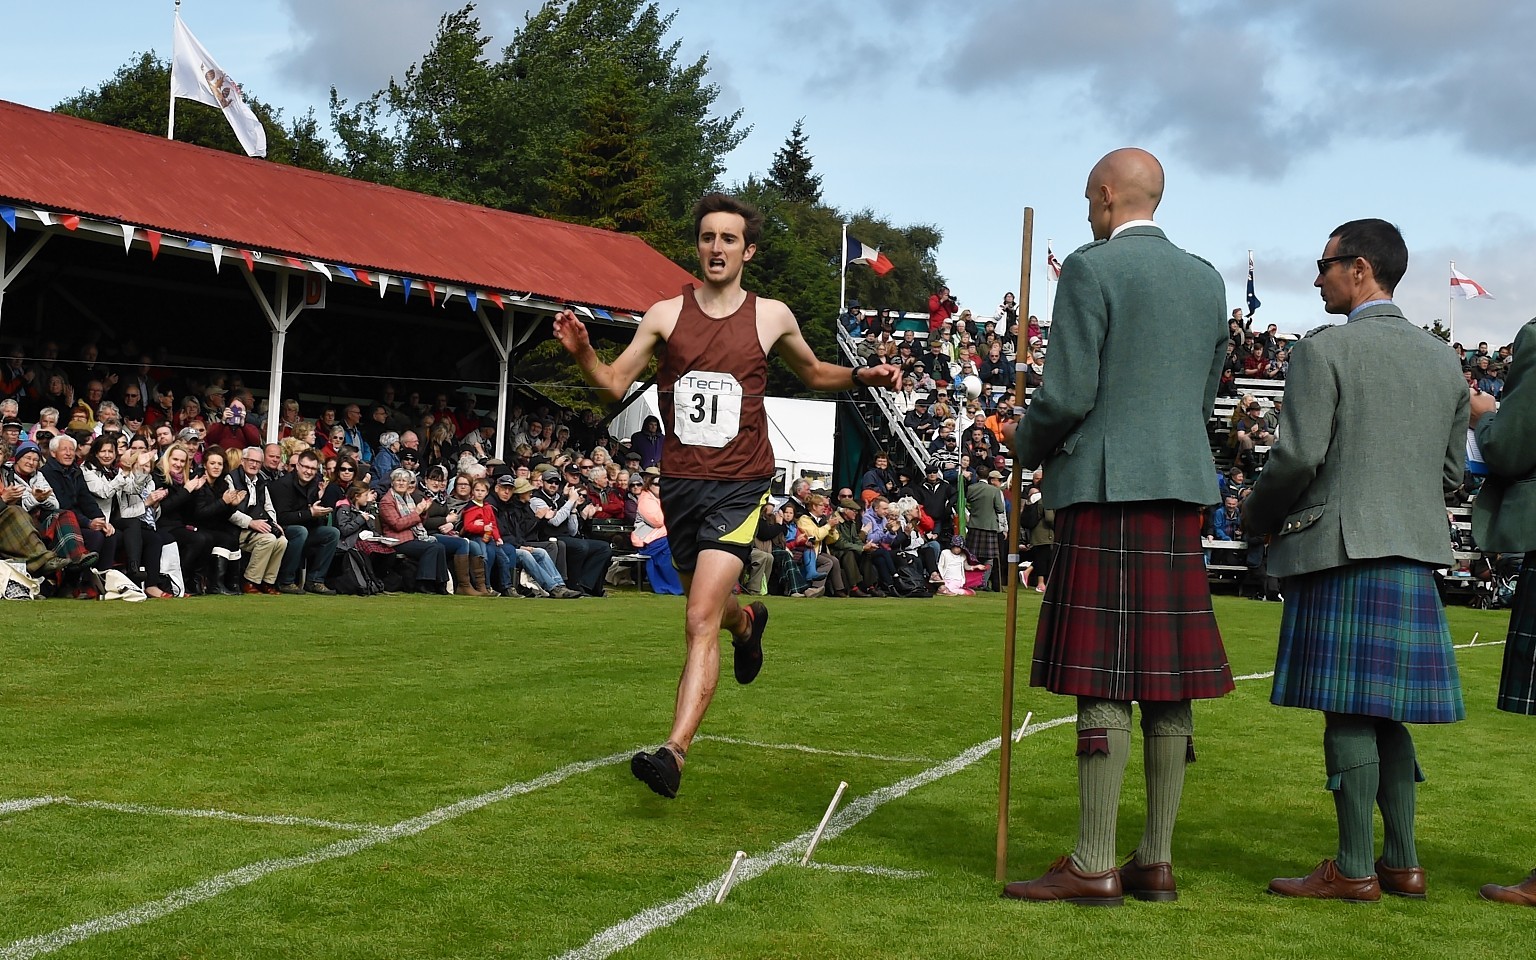 The Braemar Gathering celebrated its 200th anniversary.